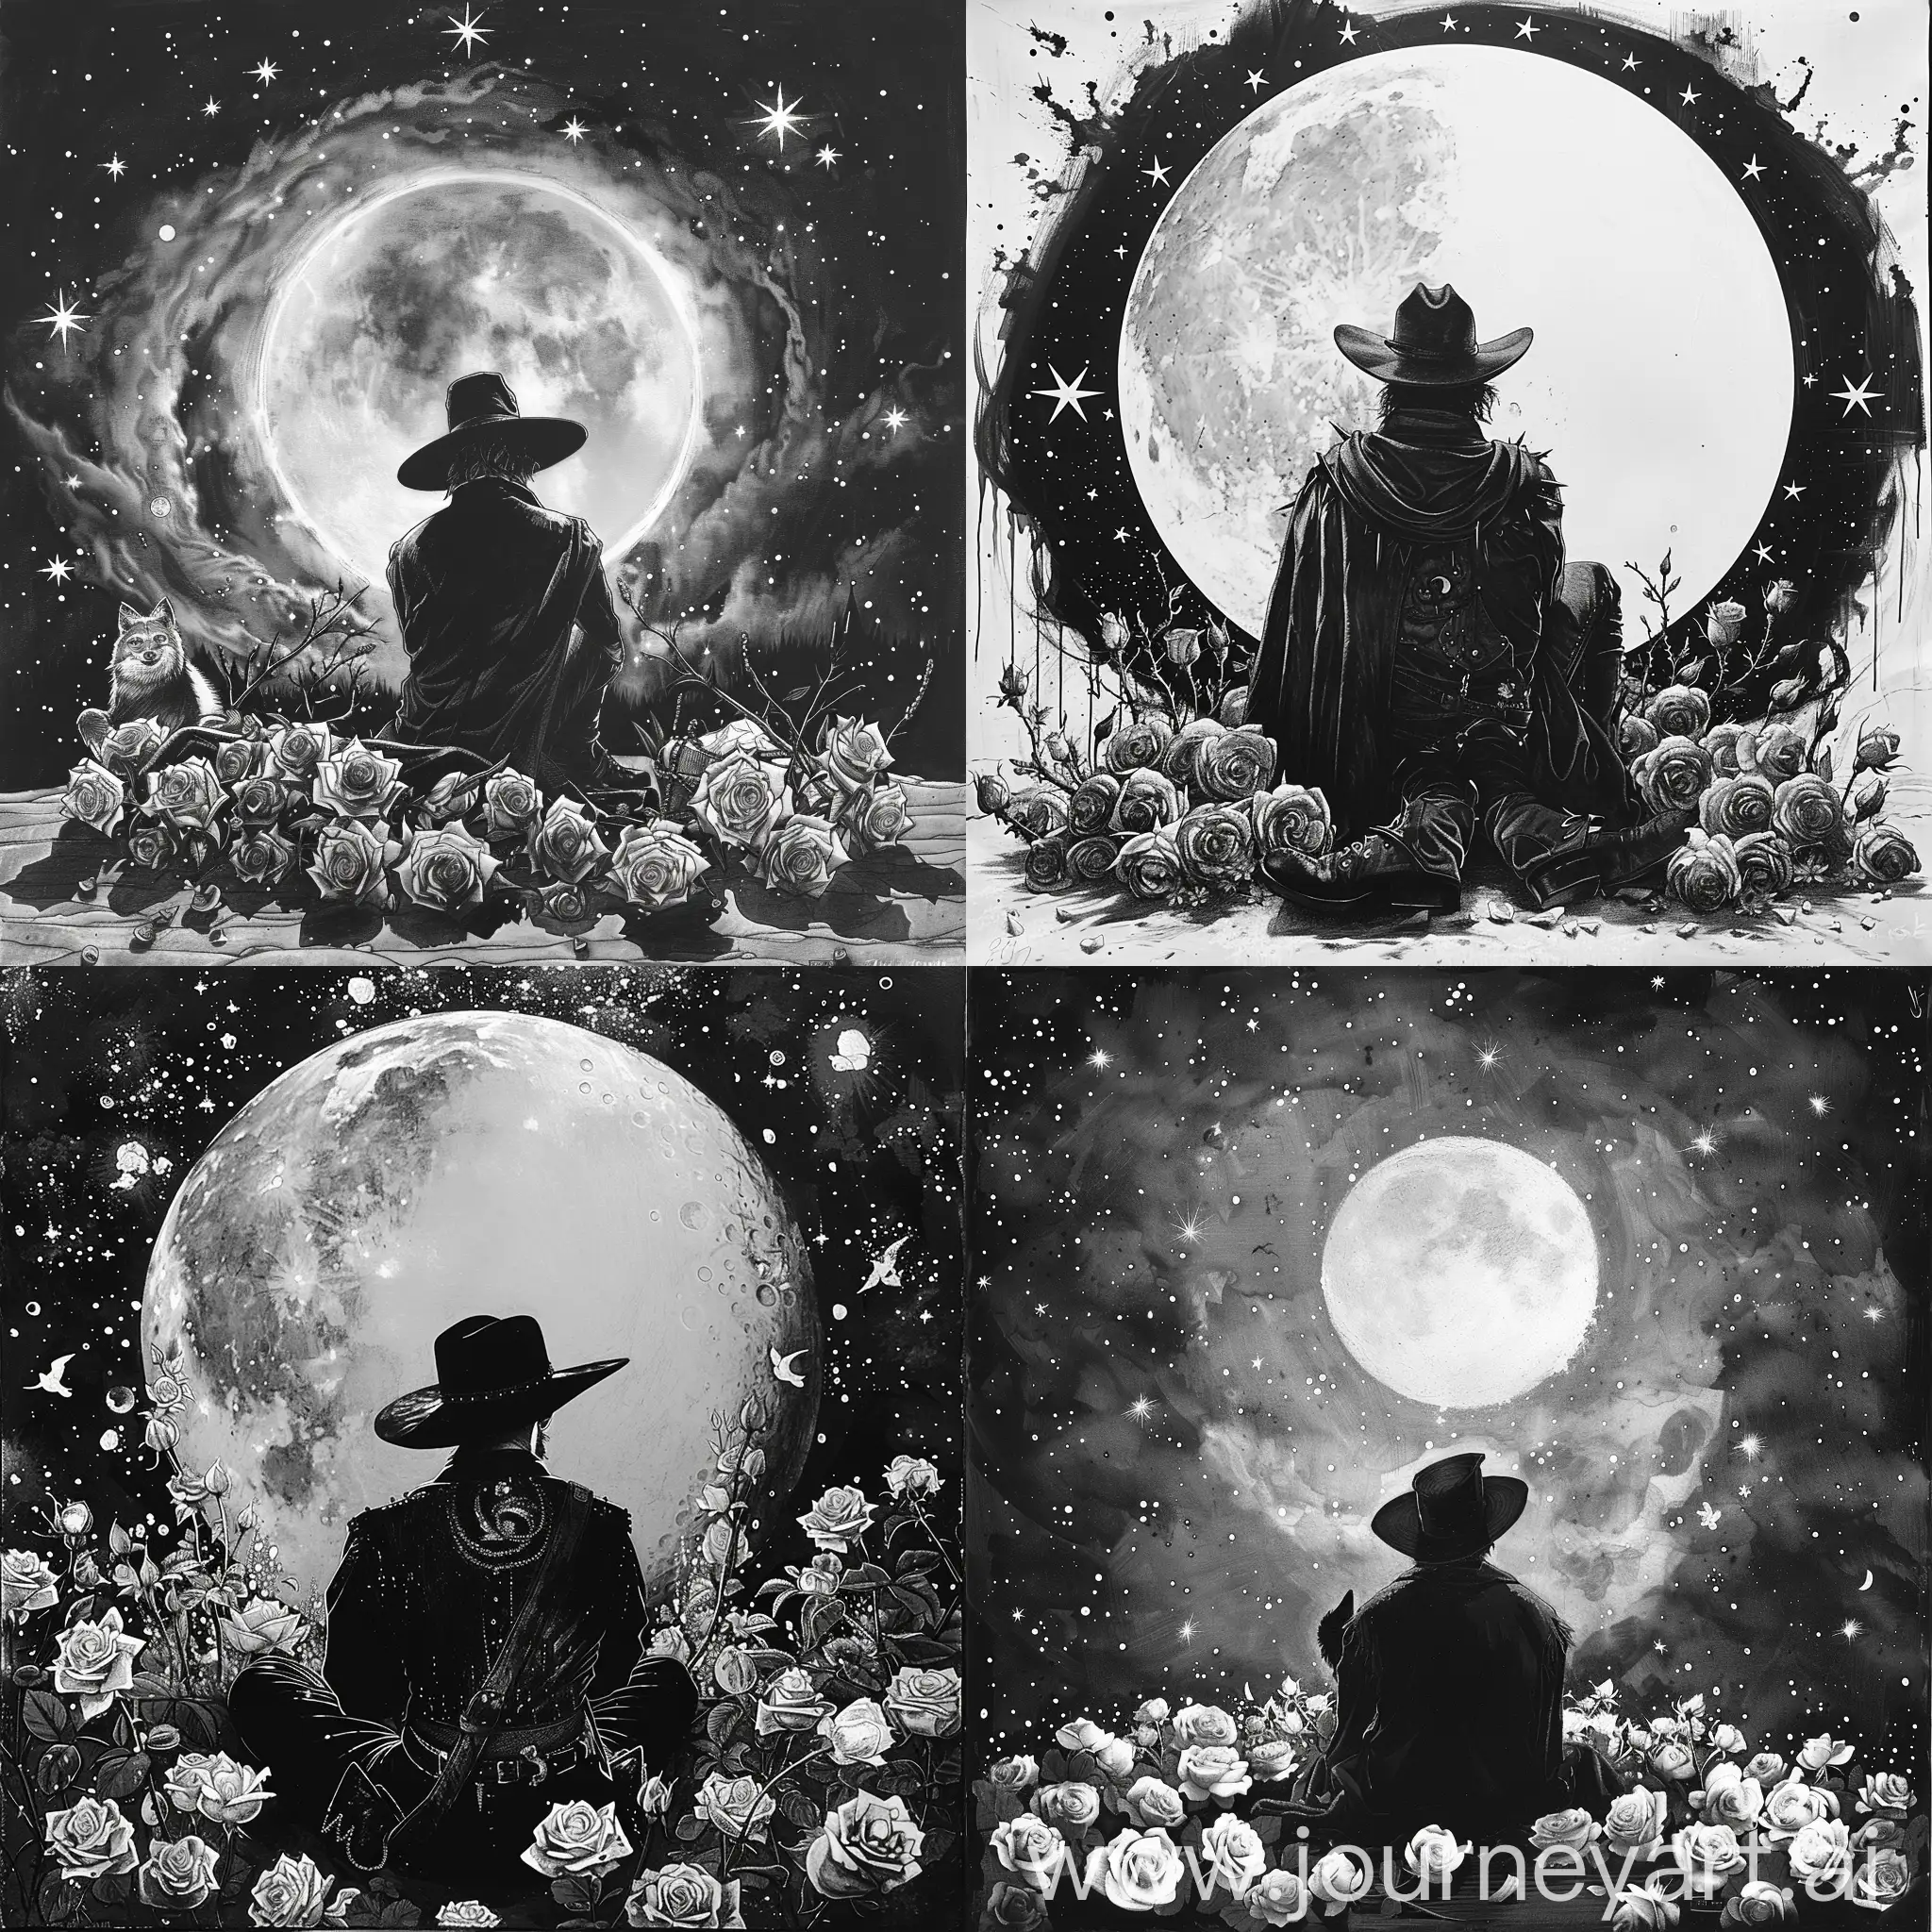 Zorro-Sitting-Under-Saturno-Surrounded-by-Stars-and-Roses-in-Black-and-White